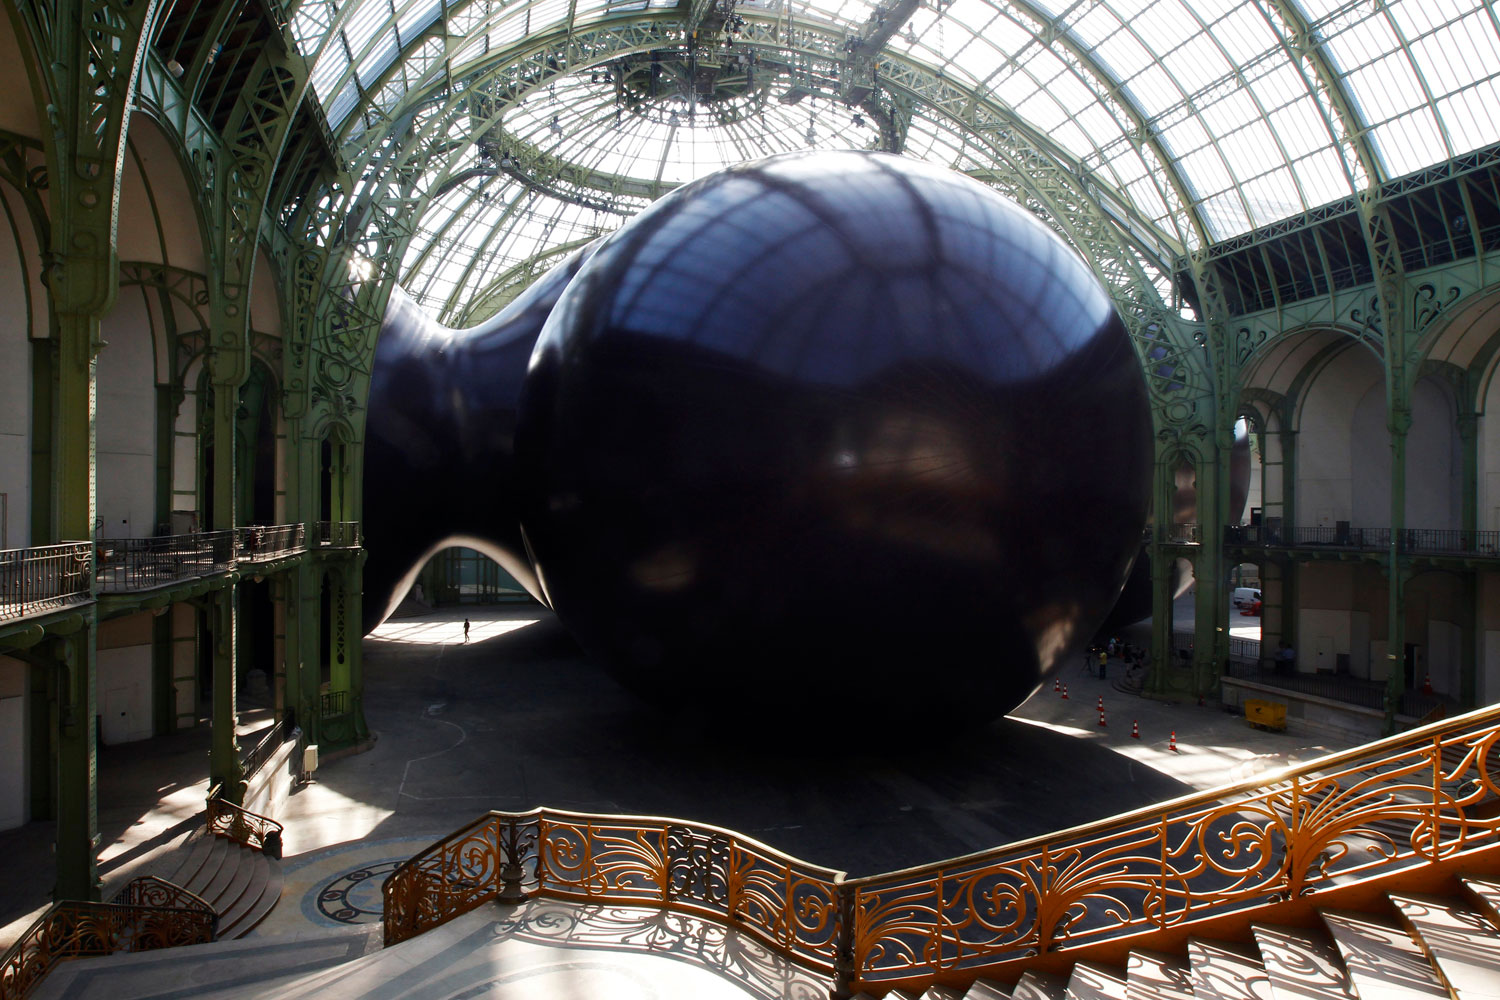 May 9, 2011.  General view of the set-up  Leviathan  by Indian born, British based, artist Anish Kapoor for the Monumenta 2011 event in the Nave of the Grand Palais in Paris.